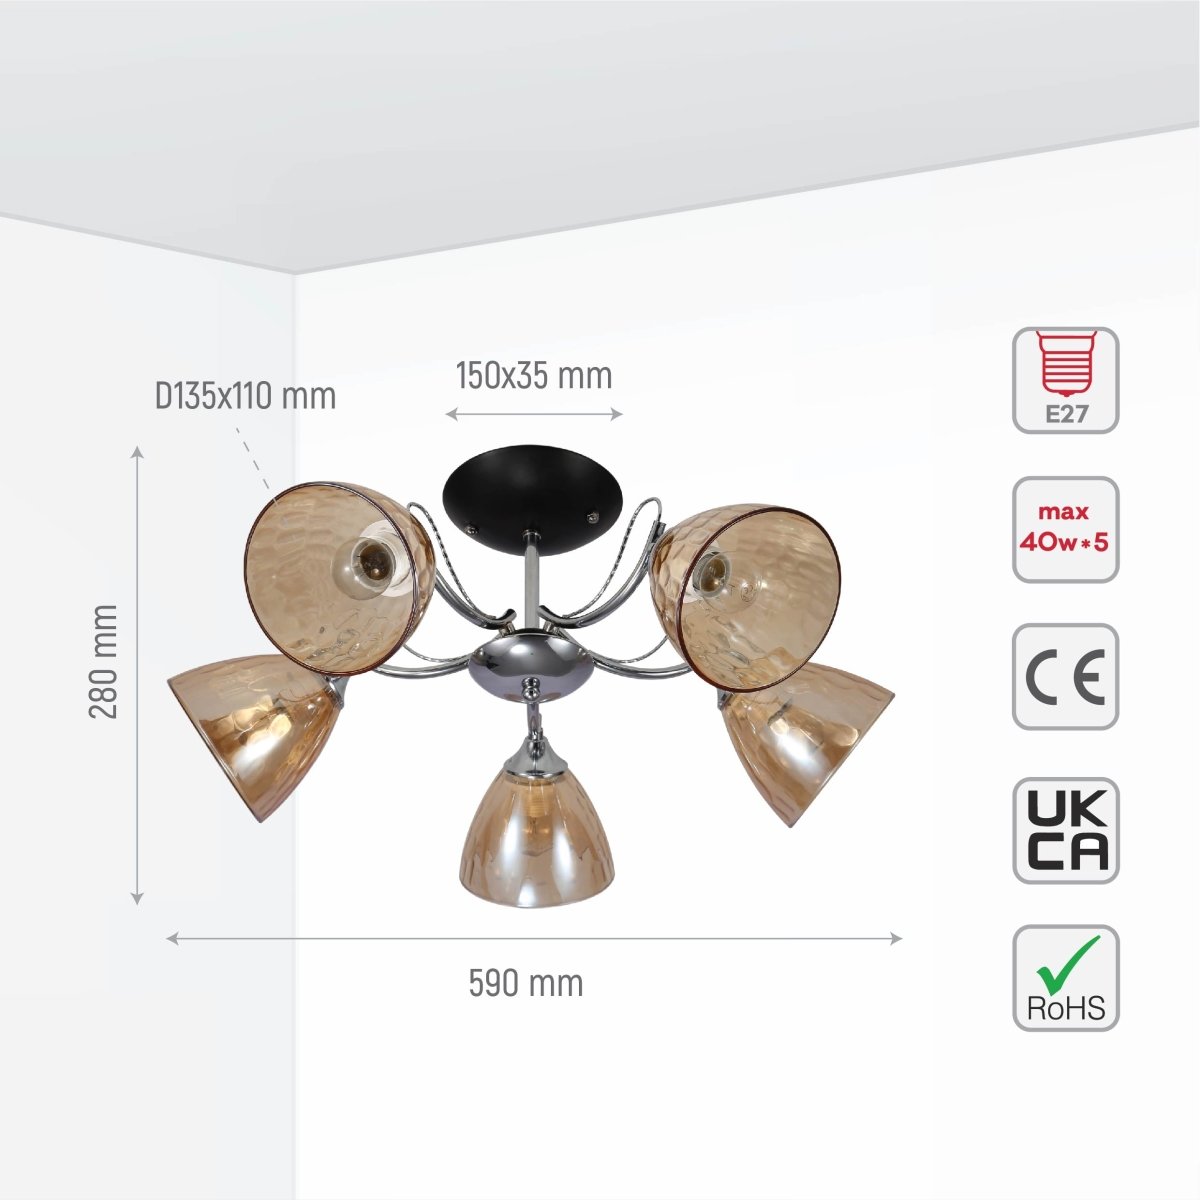 Size and specs of Textured Clear Cone Glass Chrome Semi Flush Ceiling Light | TEKLED 159-17764